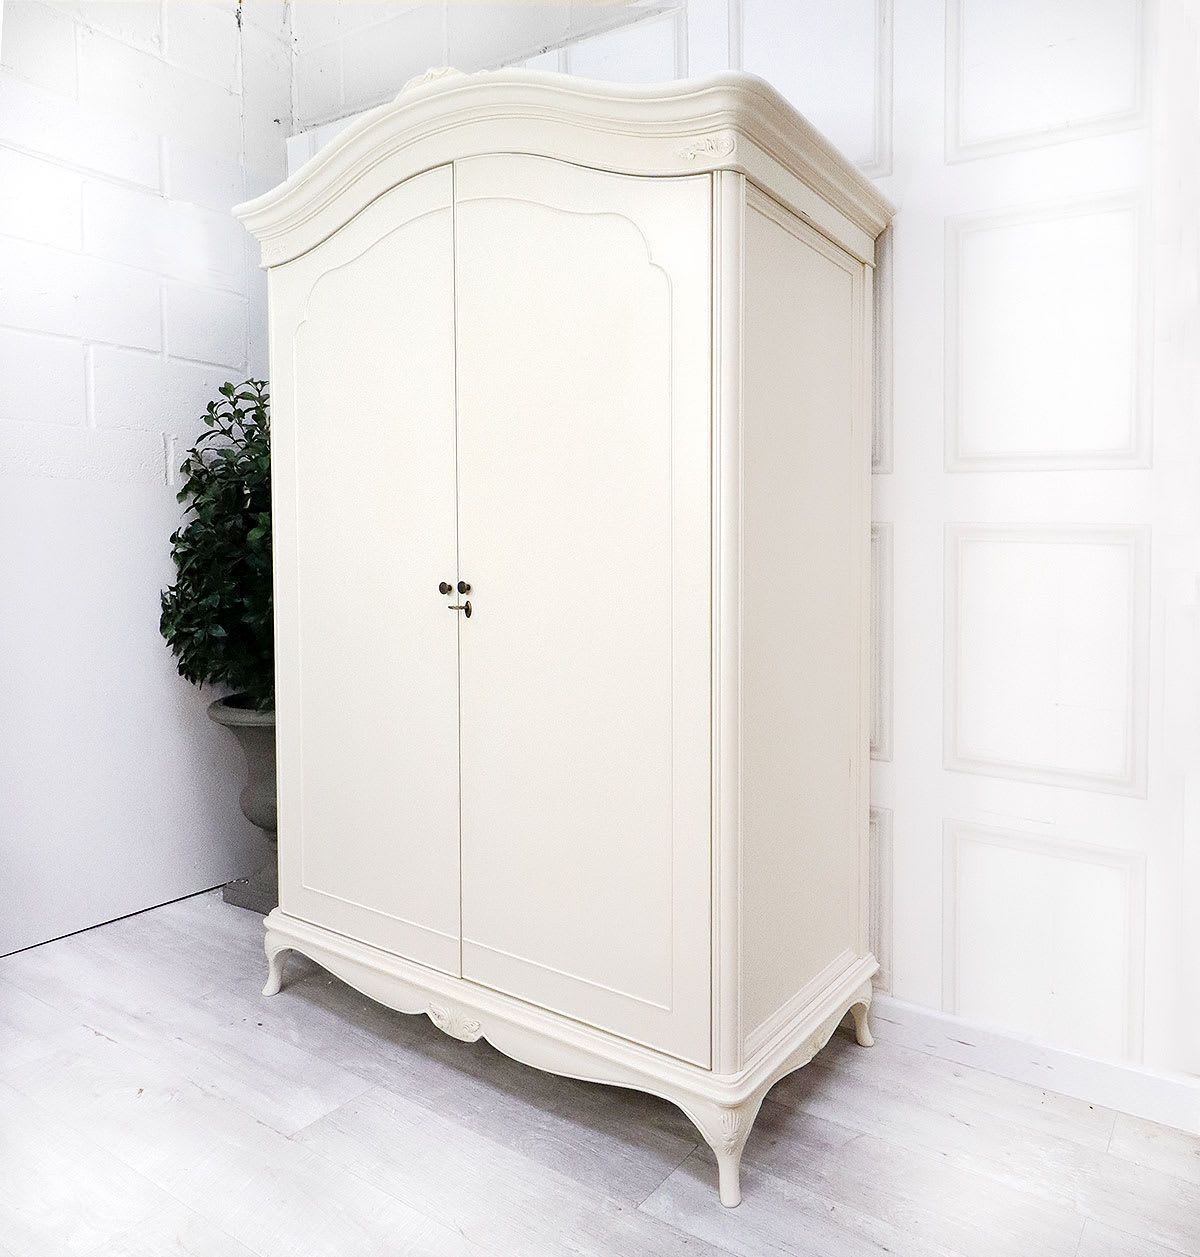 Willis & Gambier French Style Ivory Large Armoire Wardrobe | Nicky Cornell  A Uk Stockist Inside French Wardrobes For Sale (View 7 of 15)